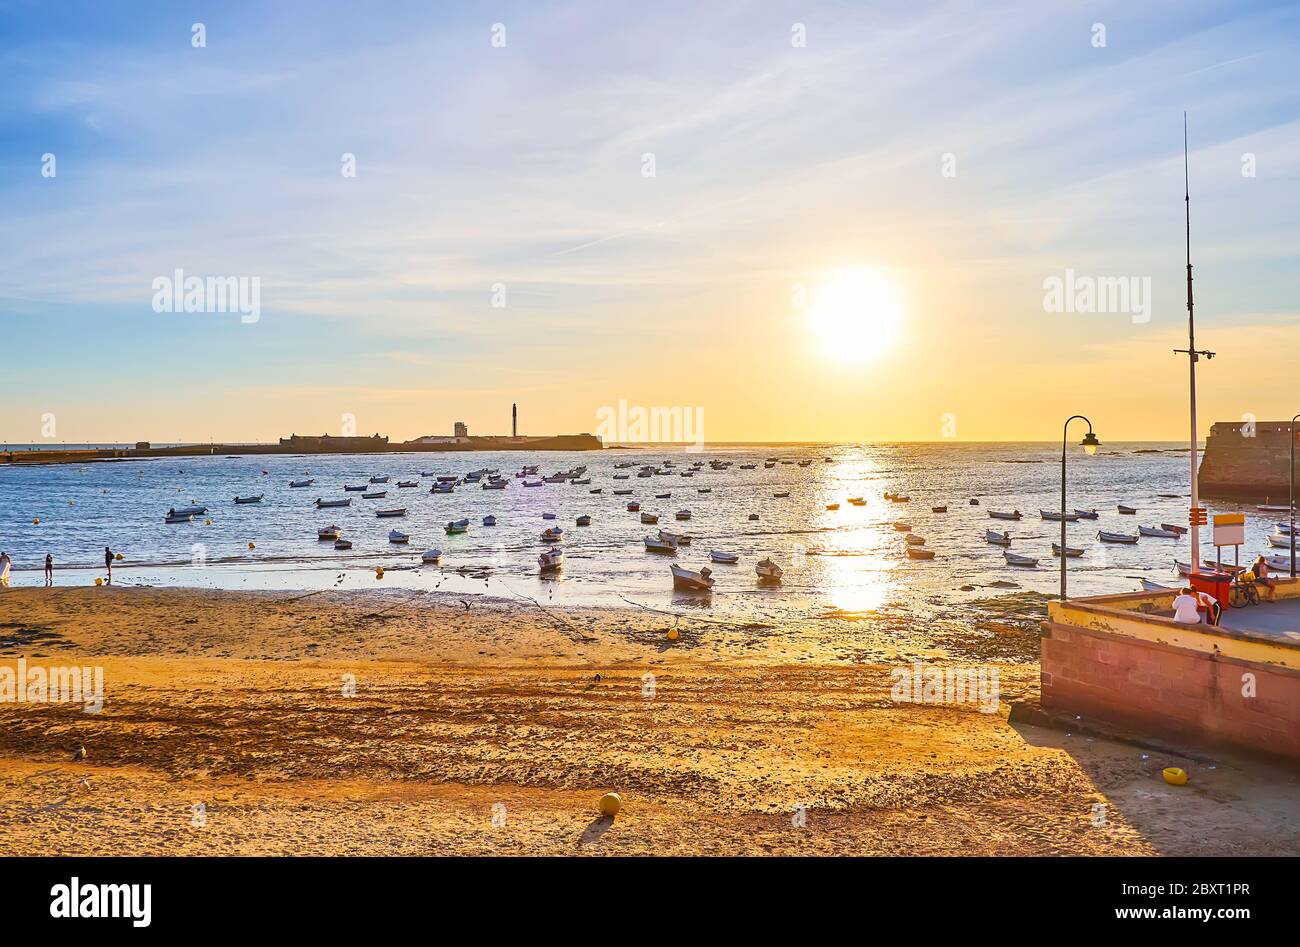 The sunset seascape with many fishing boats, moored at La Caleta beach with a view on San Sebastian Castle on the horizon, Cadiz, Spain Stock Photo